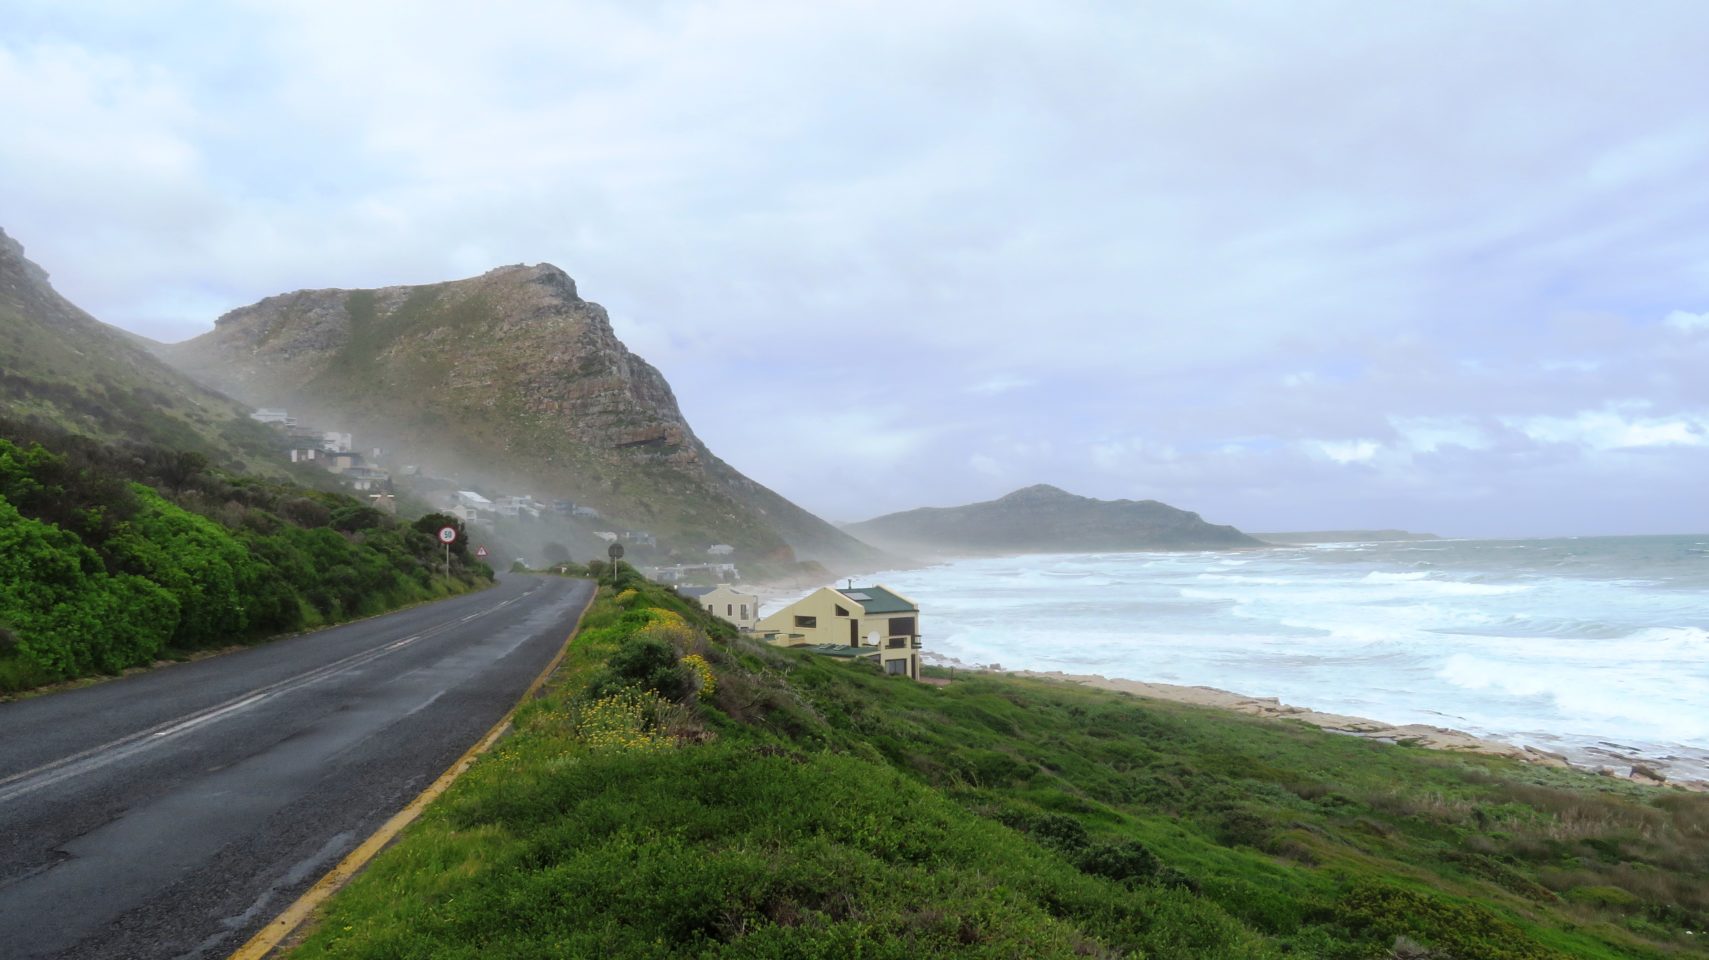 Aptly named "Misty Cliffs", this fishing village nestled in the hillside with its rockeries, wild flowers and wild ocean is quintessential Cape Peninsula